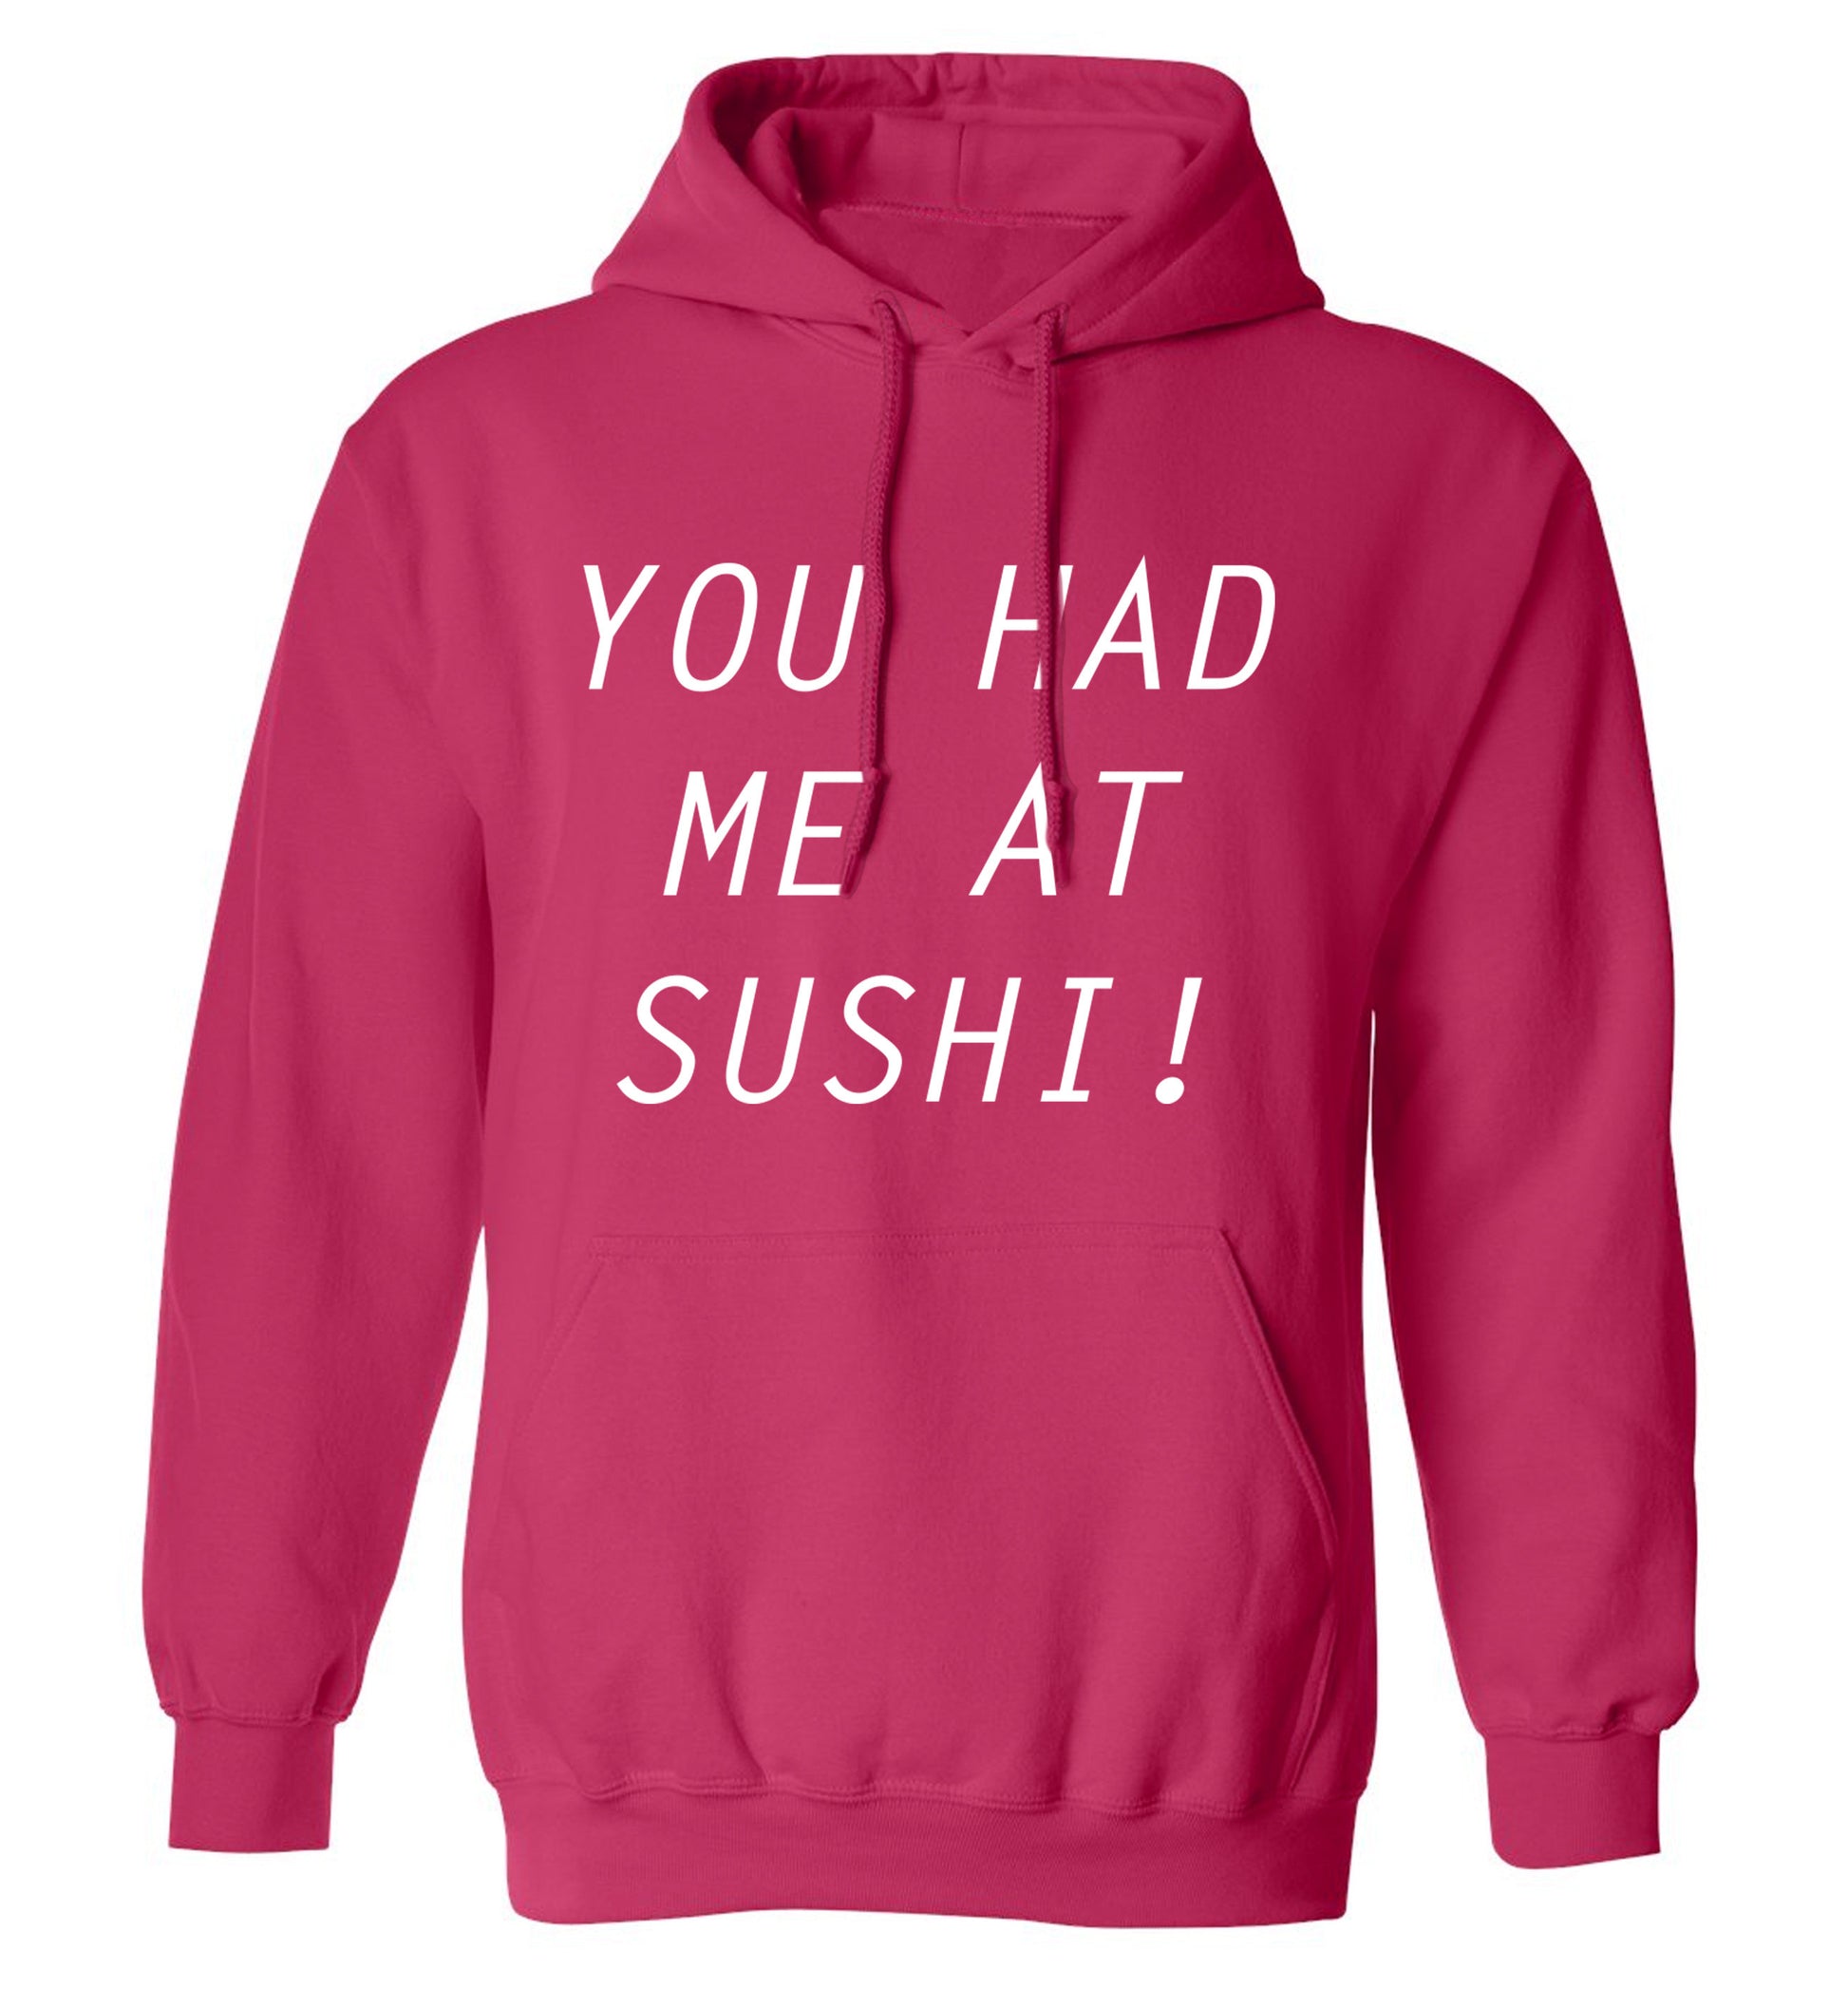 You had me at sushi adults unisex pink hoodie 2XL